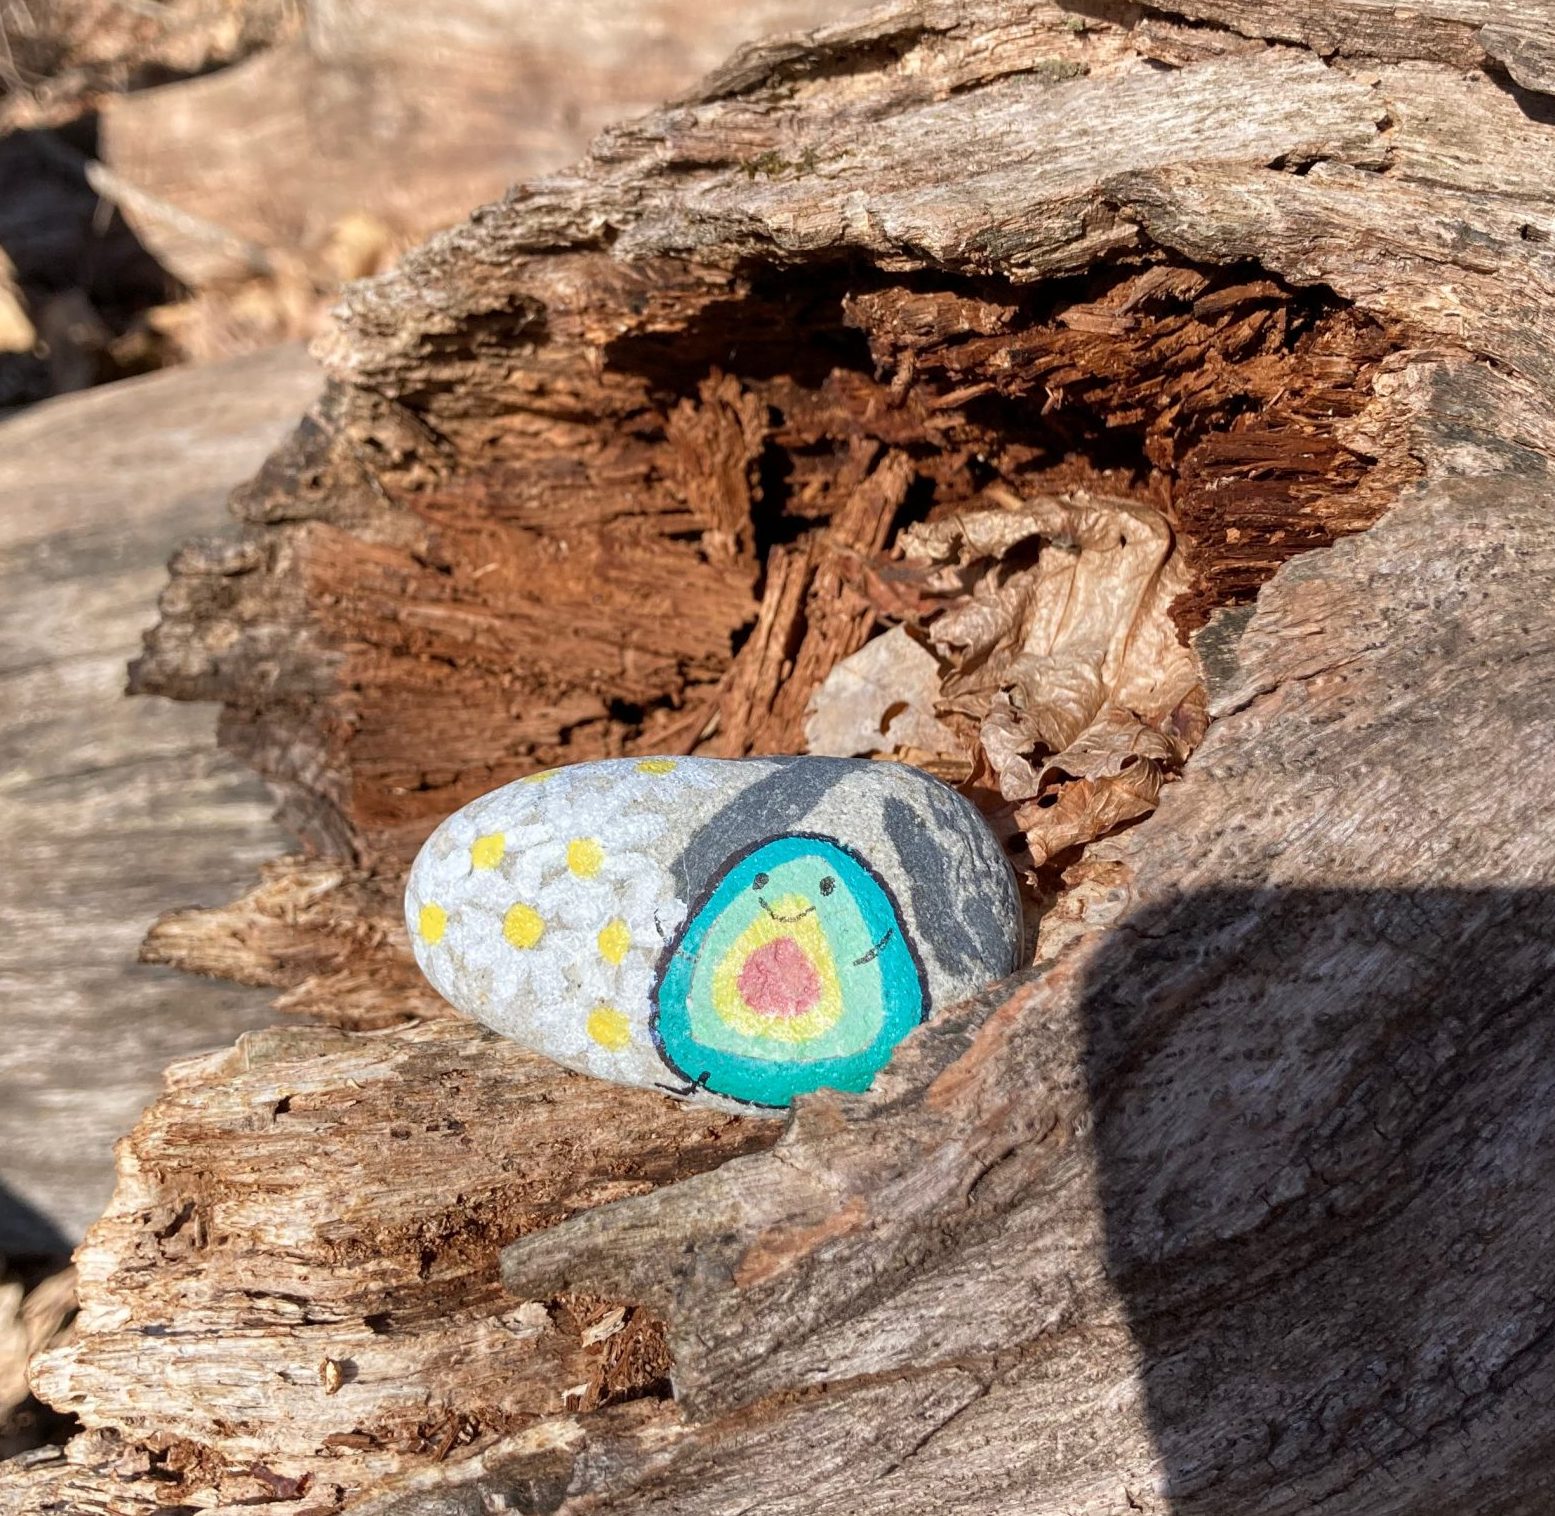 A rock sits inside the hollow of a fallen tree. The rock has a cute anthropomorphic avocado painted on it.